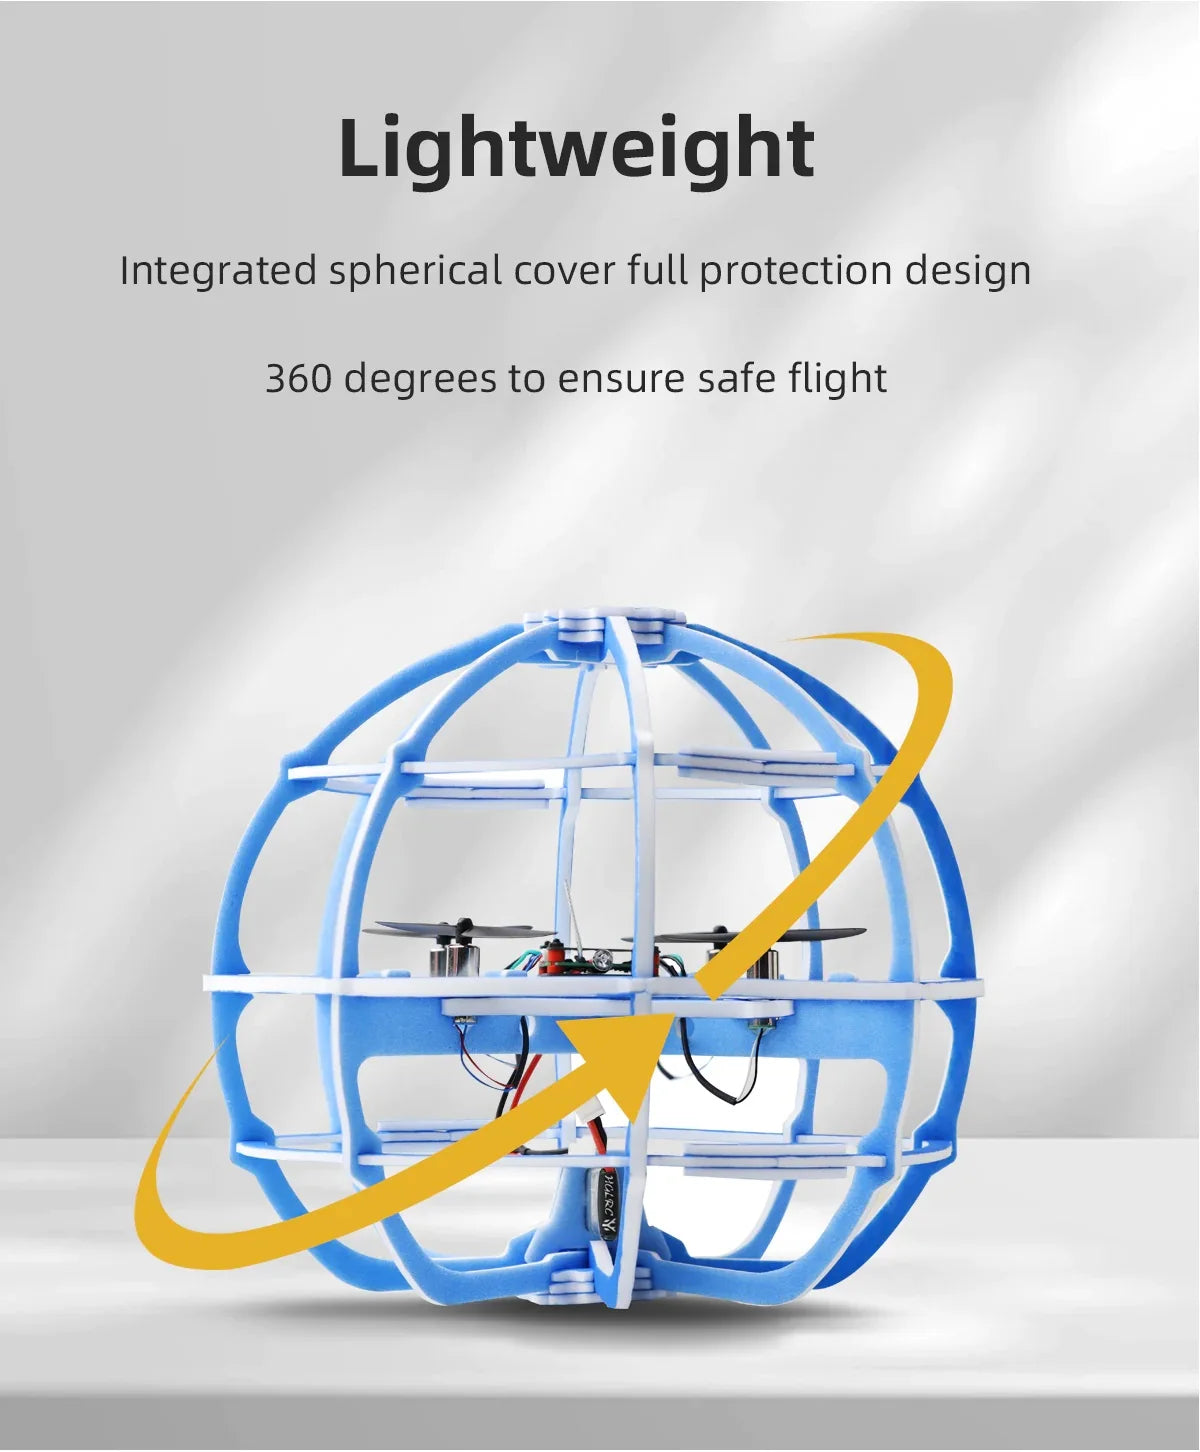 HGLRC A200 Soccer Ball Drone, Lightweight Integrated spherical cover full protection design 360 degrees to ensure Safe flight